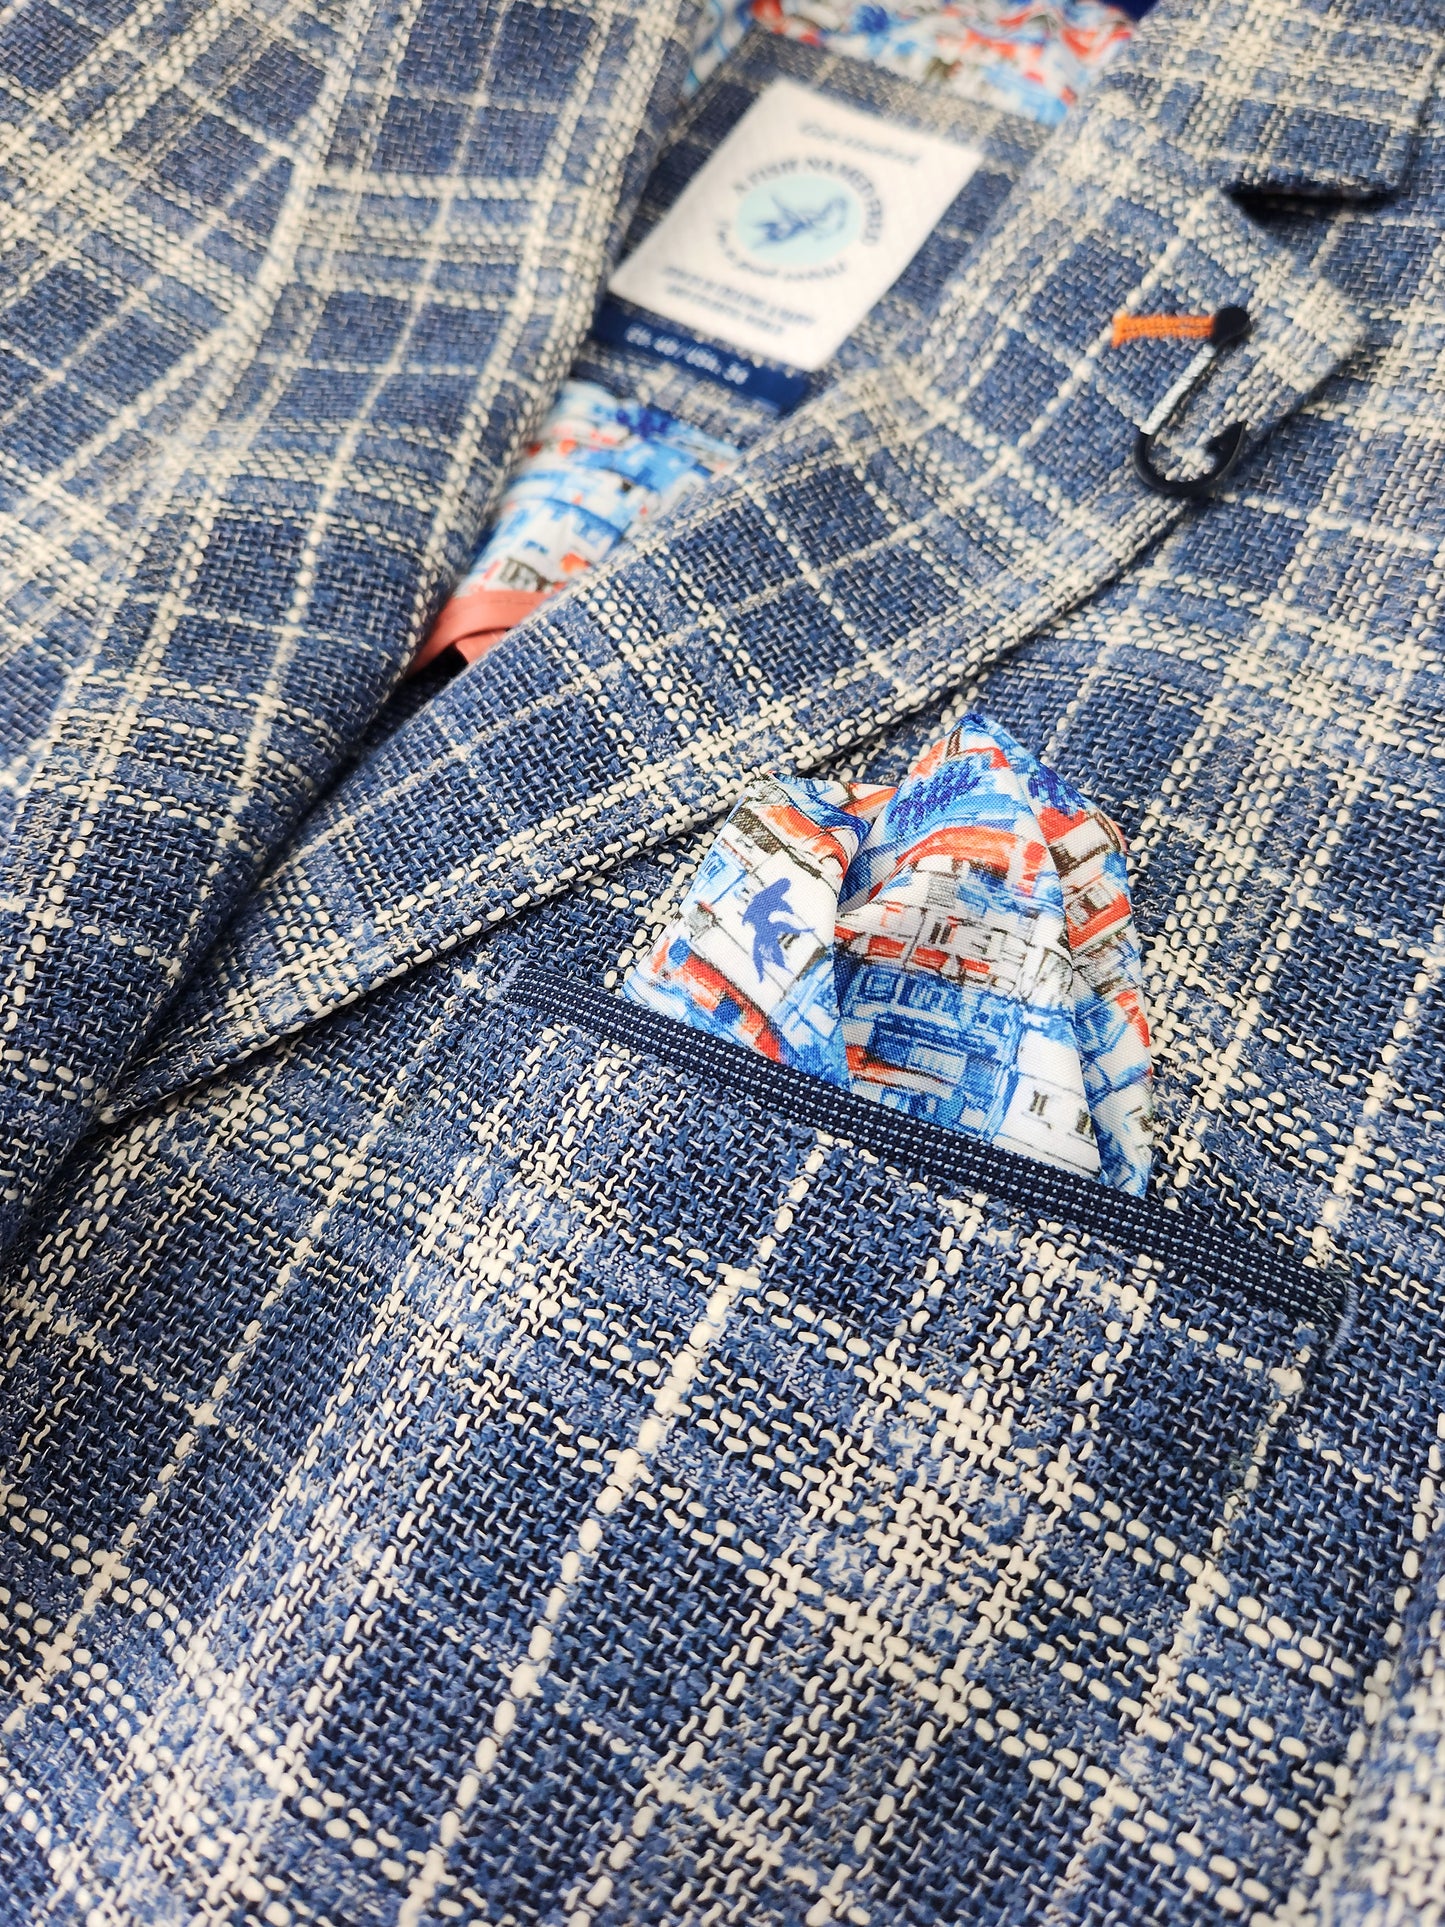 Blue Check Linen Structure Jacket - A Fish Named Fred